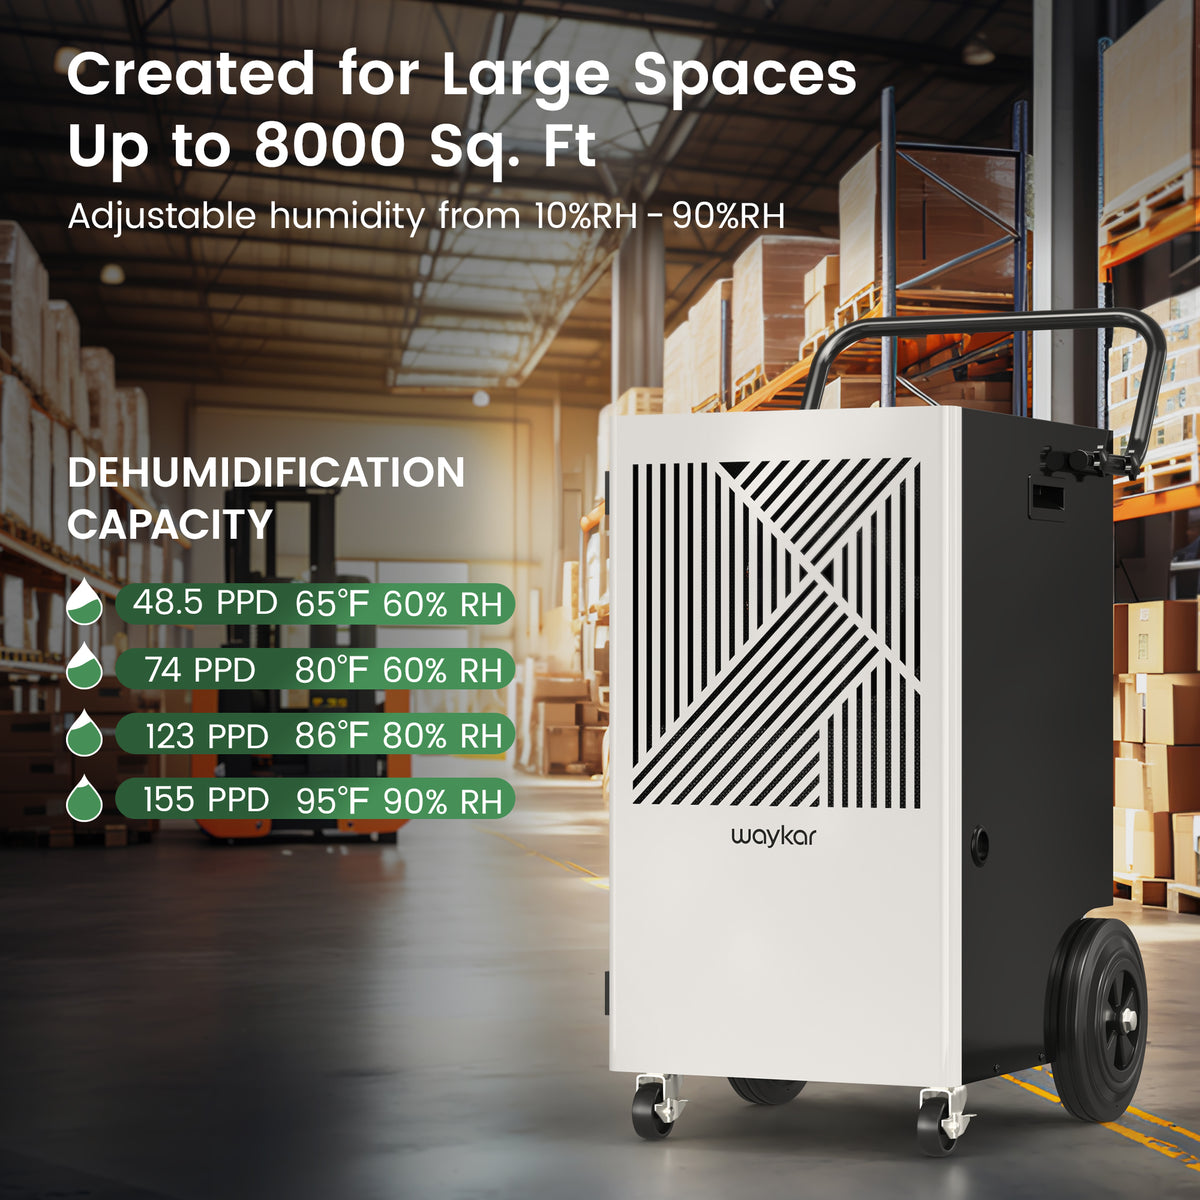 Waykar 155 Pints Commercial Dehumidifier with Pump, Drain Hose and Washable Filter, for Space up to 8000 Sq. Ft, for Basements, Industrial or Commercial Spaces and Flood Restoration - 5 Years Warranty (Model: DP603B)